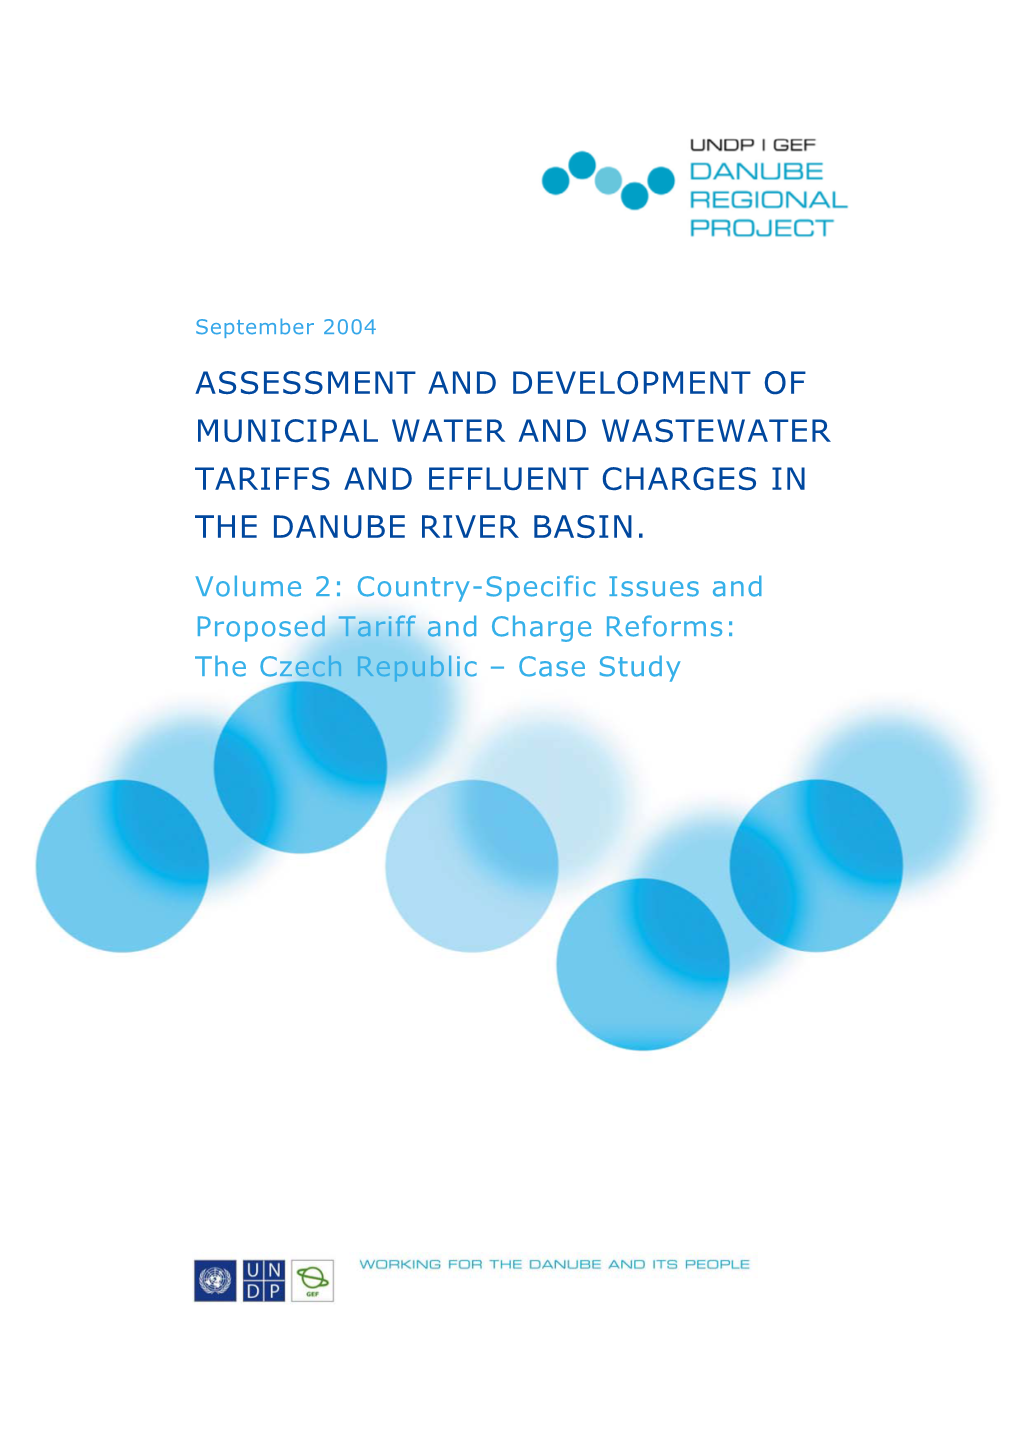 Assessment and Development of Municipal Water and Wastewater Tariffs and Effluent Charges in the Danube River Basin